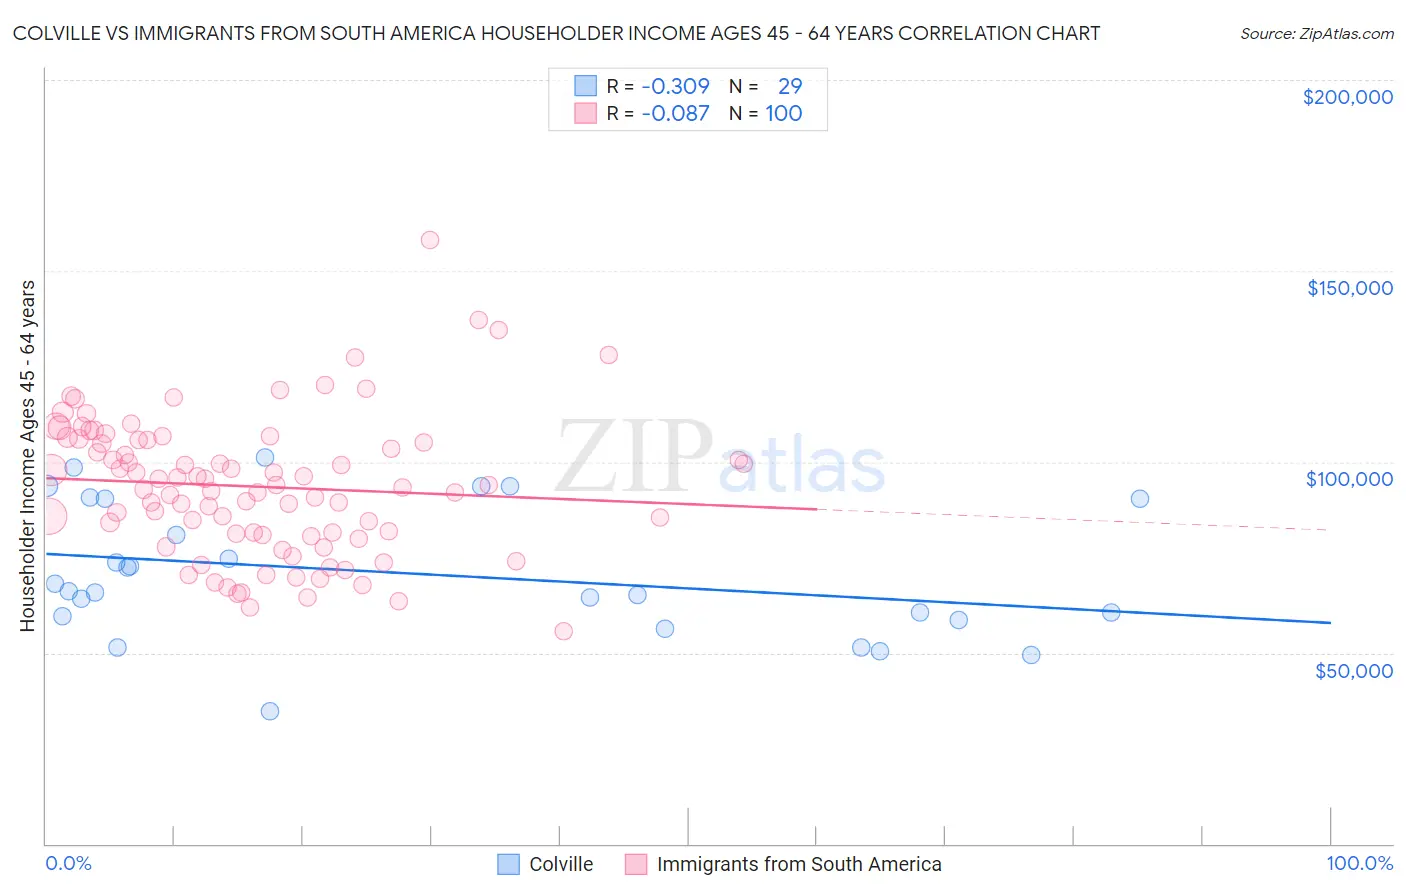 Colville vs Immigrants from South America Householder Income Ages 45 - 64 years